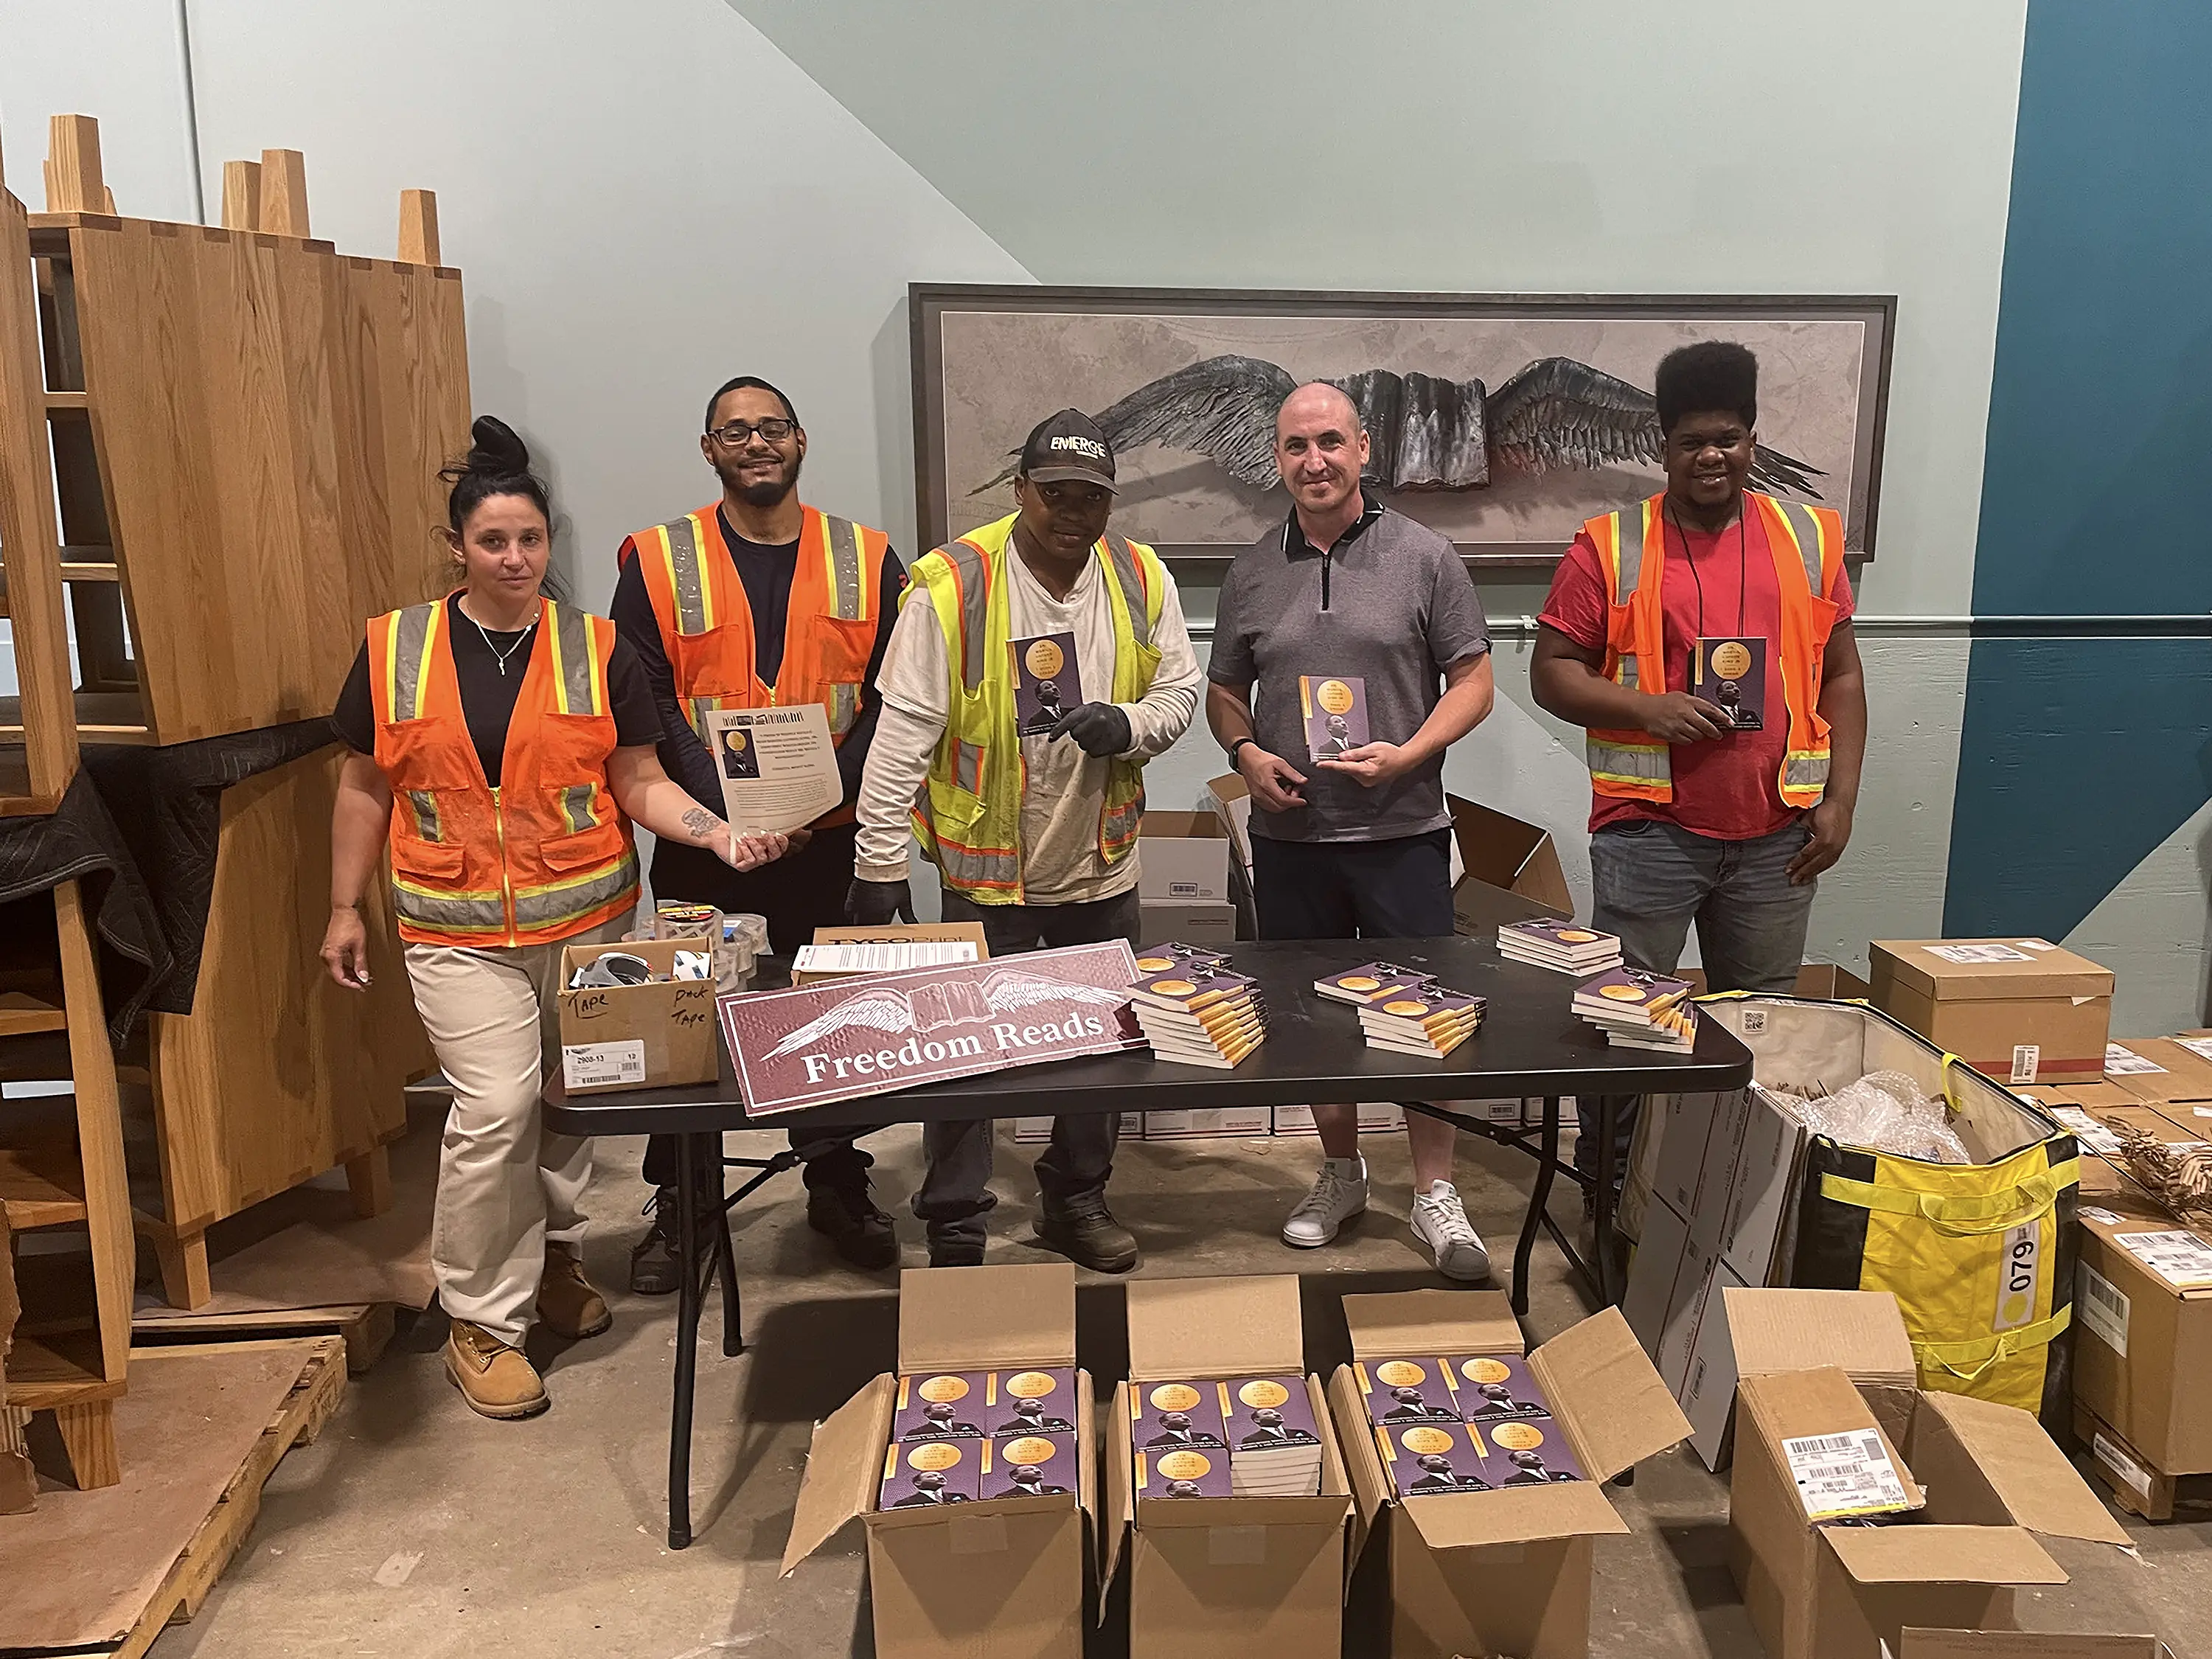 Freedom Reads shipped several hundred copies of Harper Collins' 60th anniversary edition of MLK’s “I Have a Dream” speech to incarcerated individuals in numerous prisons across the nation. The photo was chosen by Publishers Weekly as their Picture of the Day in August.